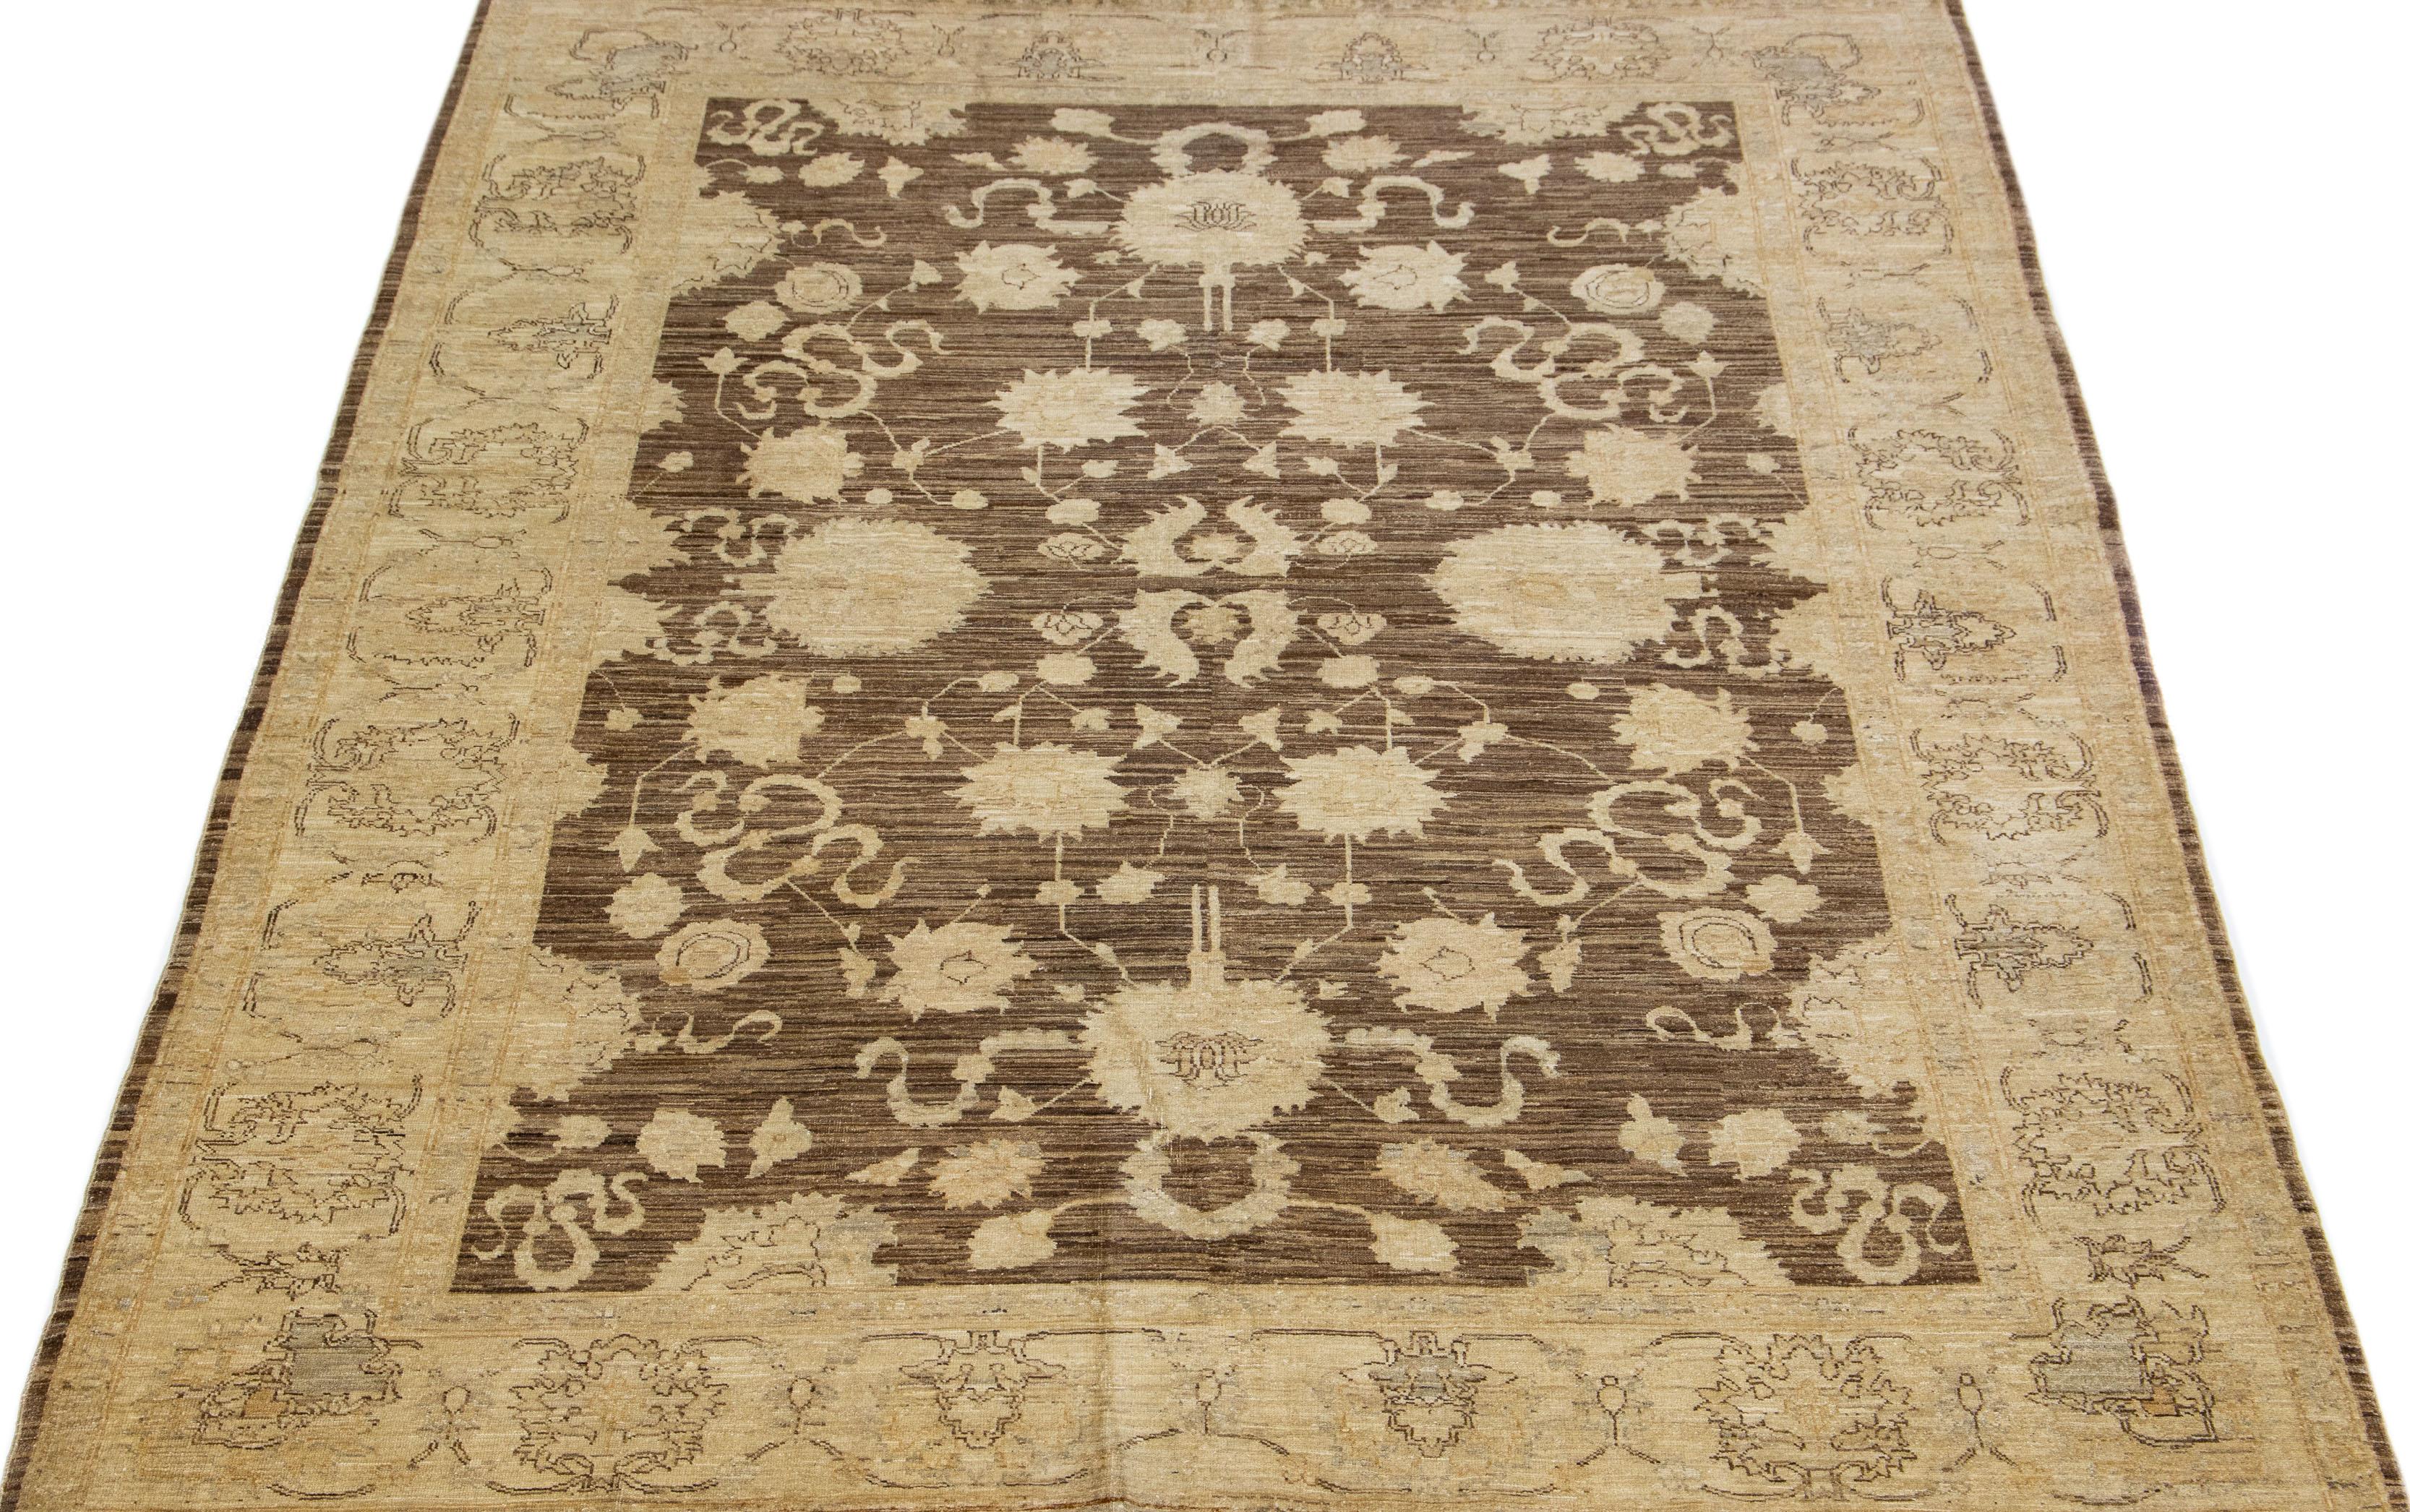 This contemporary Peshawar rug boasts exquisite craftsmanship with its intricate wool hand-knotting. The elegant design features a charming floral motif set against a warm brown backdrop with subtle beige detailing.

This rug measures 6'2